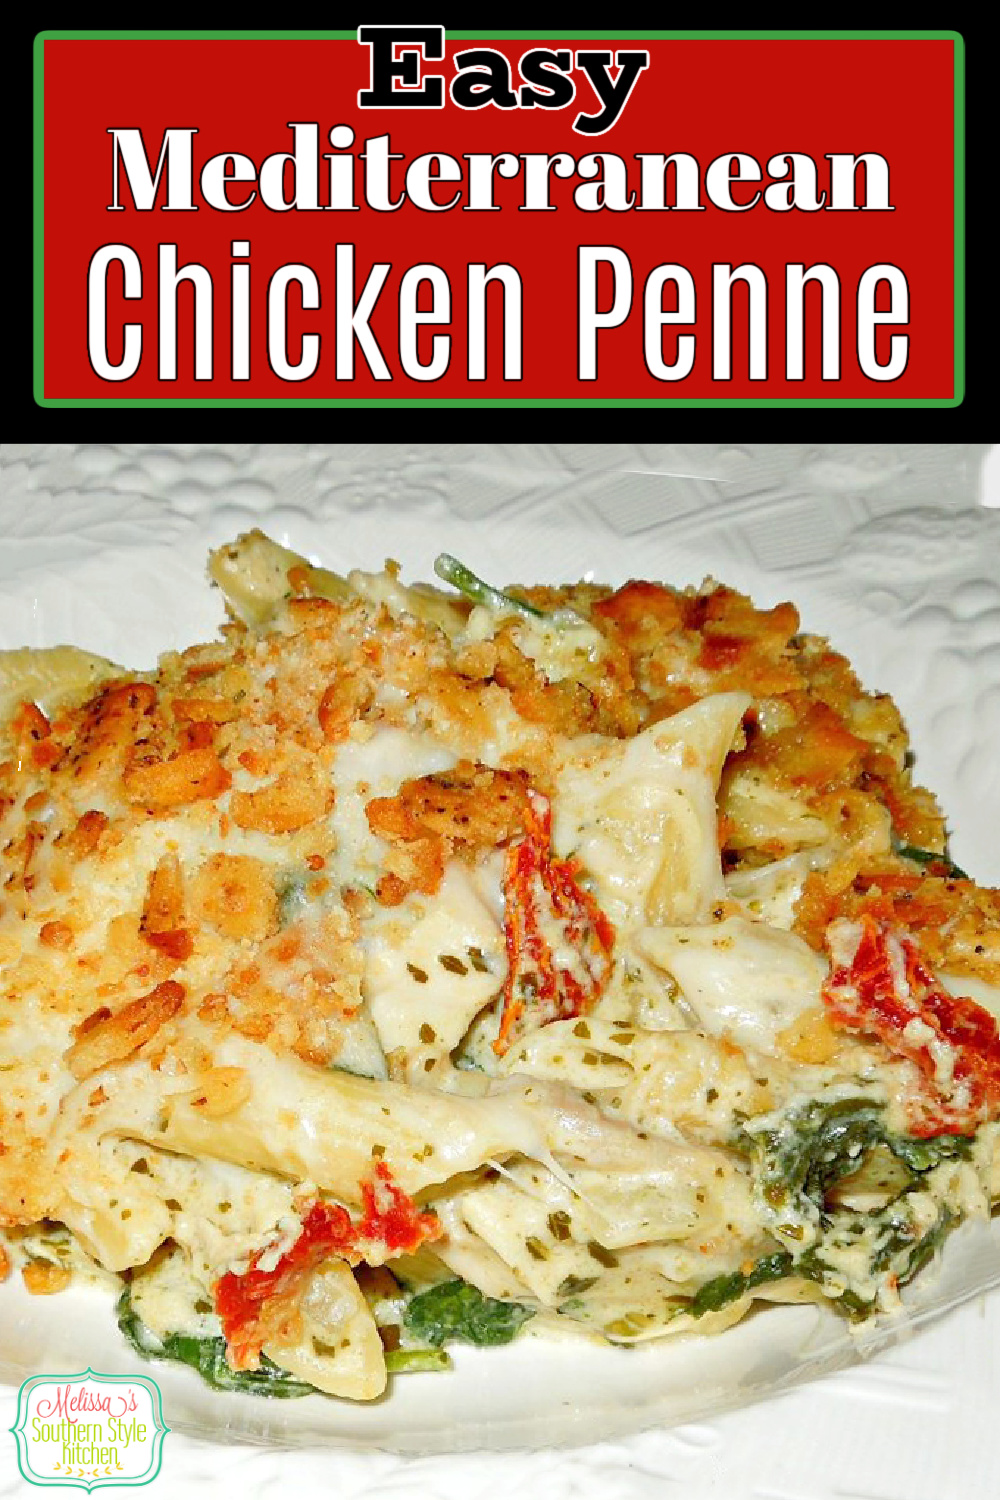 Serve this Easy Mediterranean Chicken Penne with a salad and warm garlic bread for a family-style feast at home #mediterraneanpenne #chickenrecipes #pastacasseroles #pennepastarecipes #chickenpasta #easychickenrecipes #mediterraneanrecipes via @melissasssk